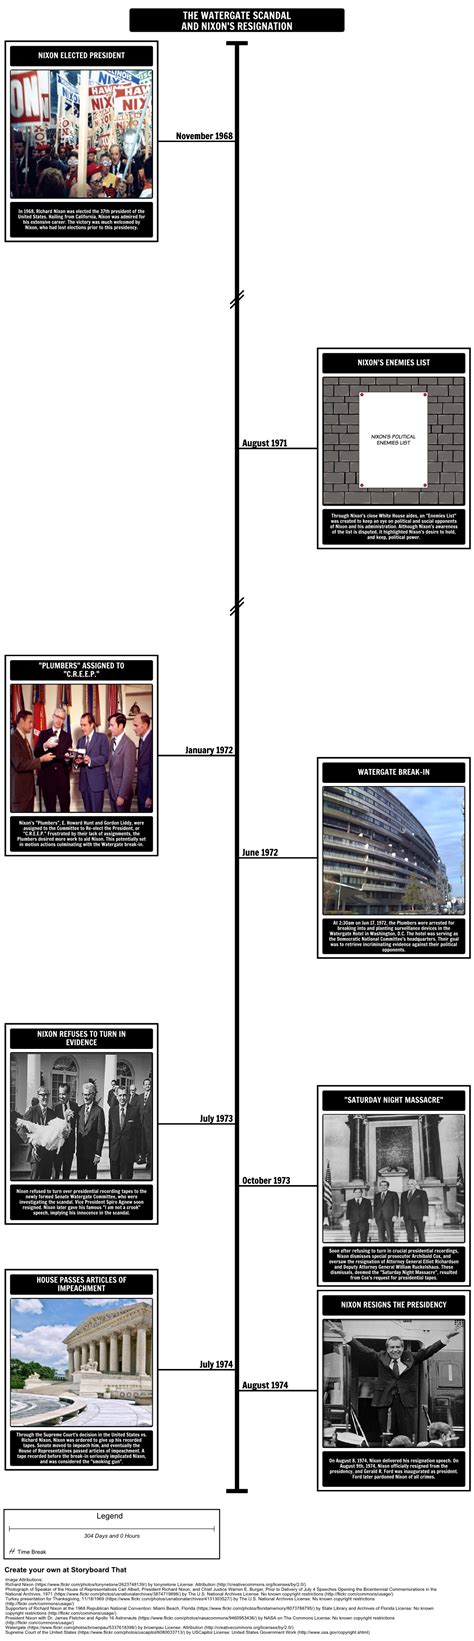 The Watergate Scandal Timeline And Nixon S Resignation